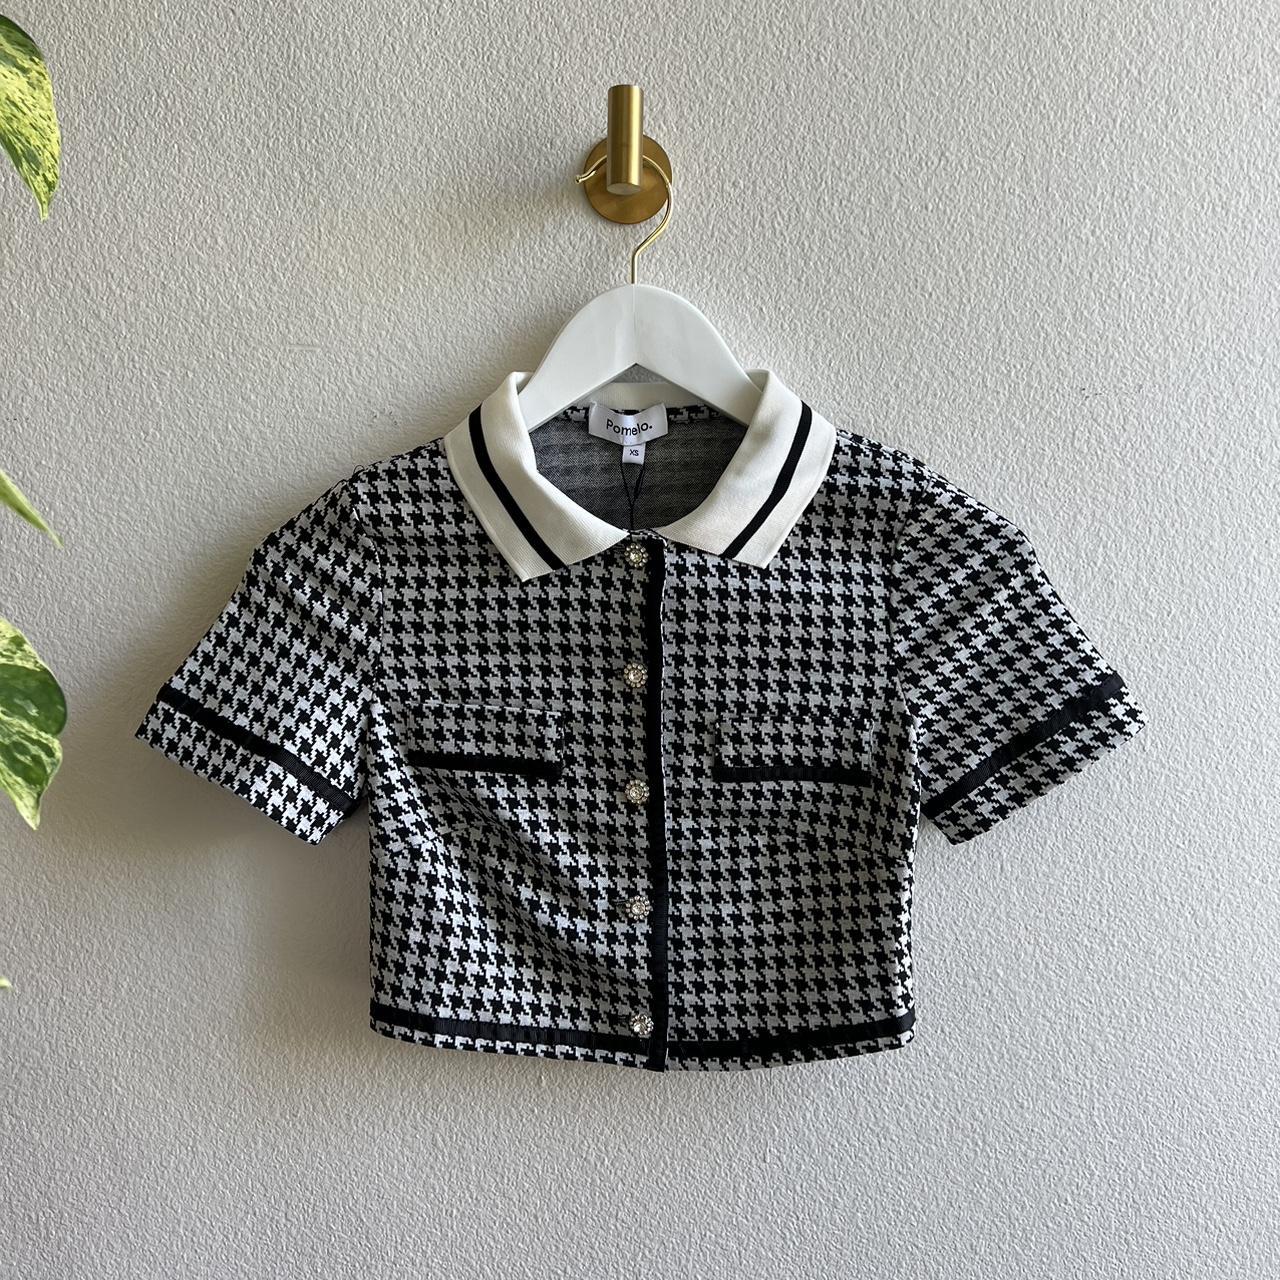 Product Image 2 - Pomelo - Houndstooth Crop Top
Size